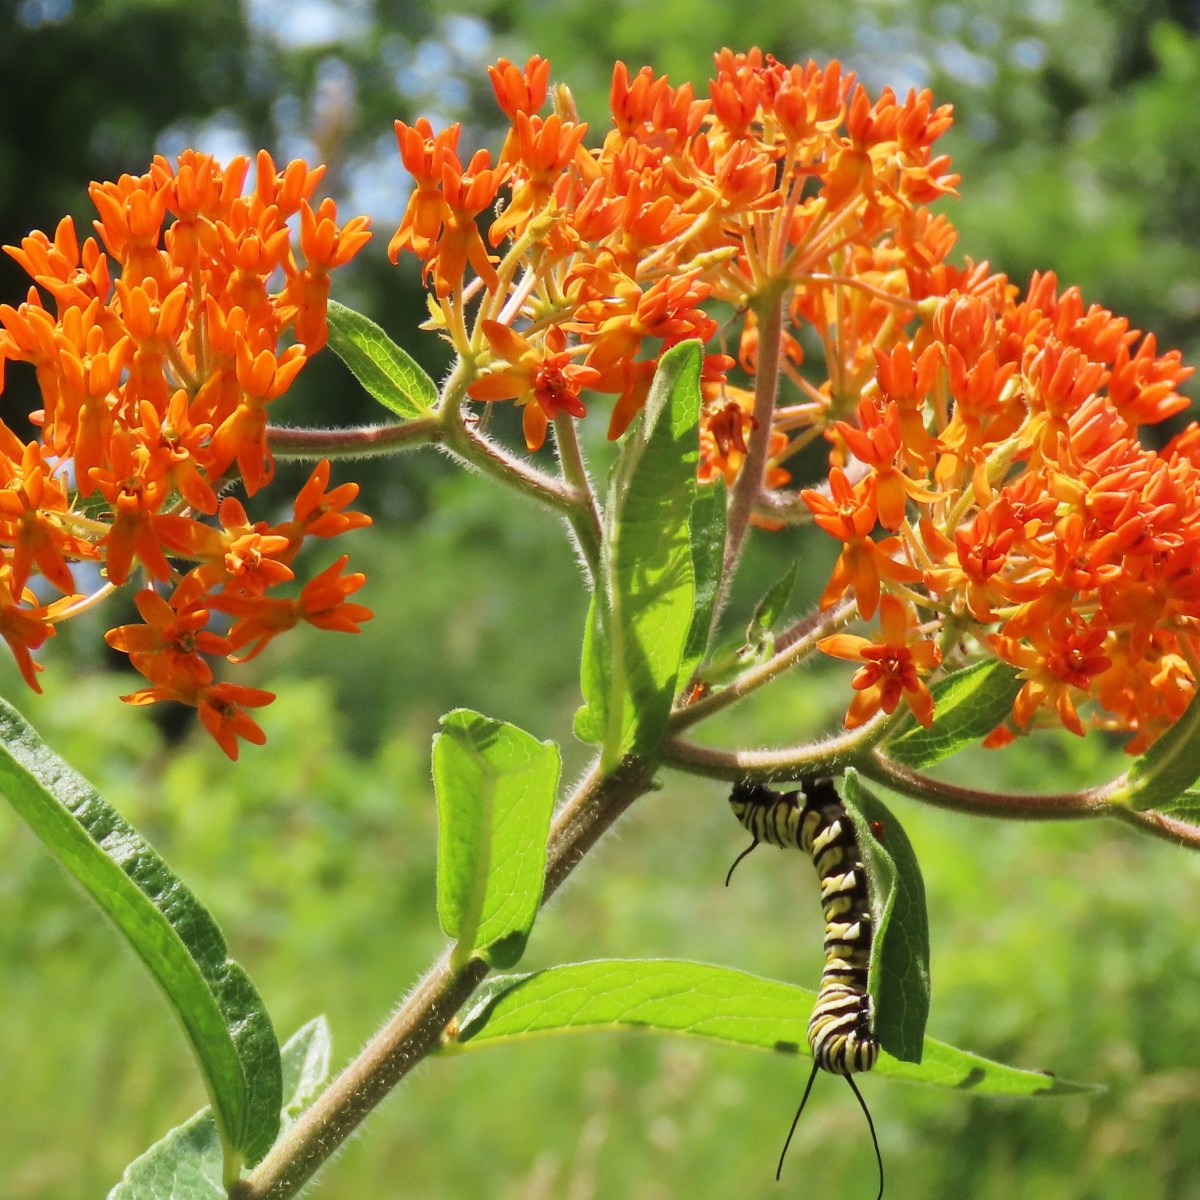 A caterpillar and a bee on a butterfly weed plant